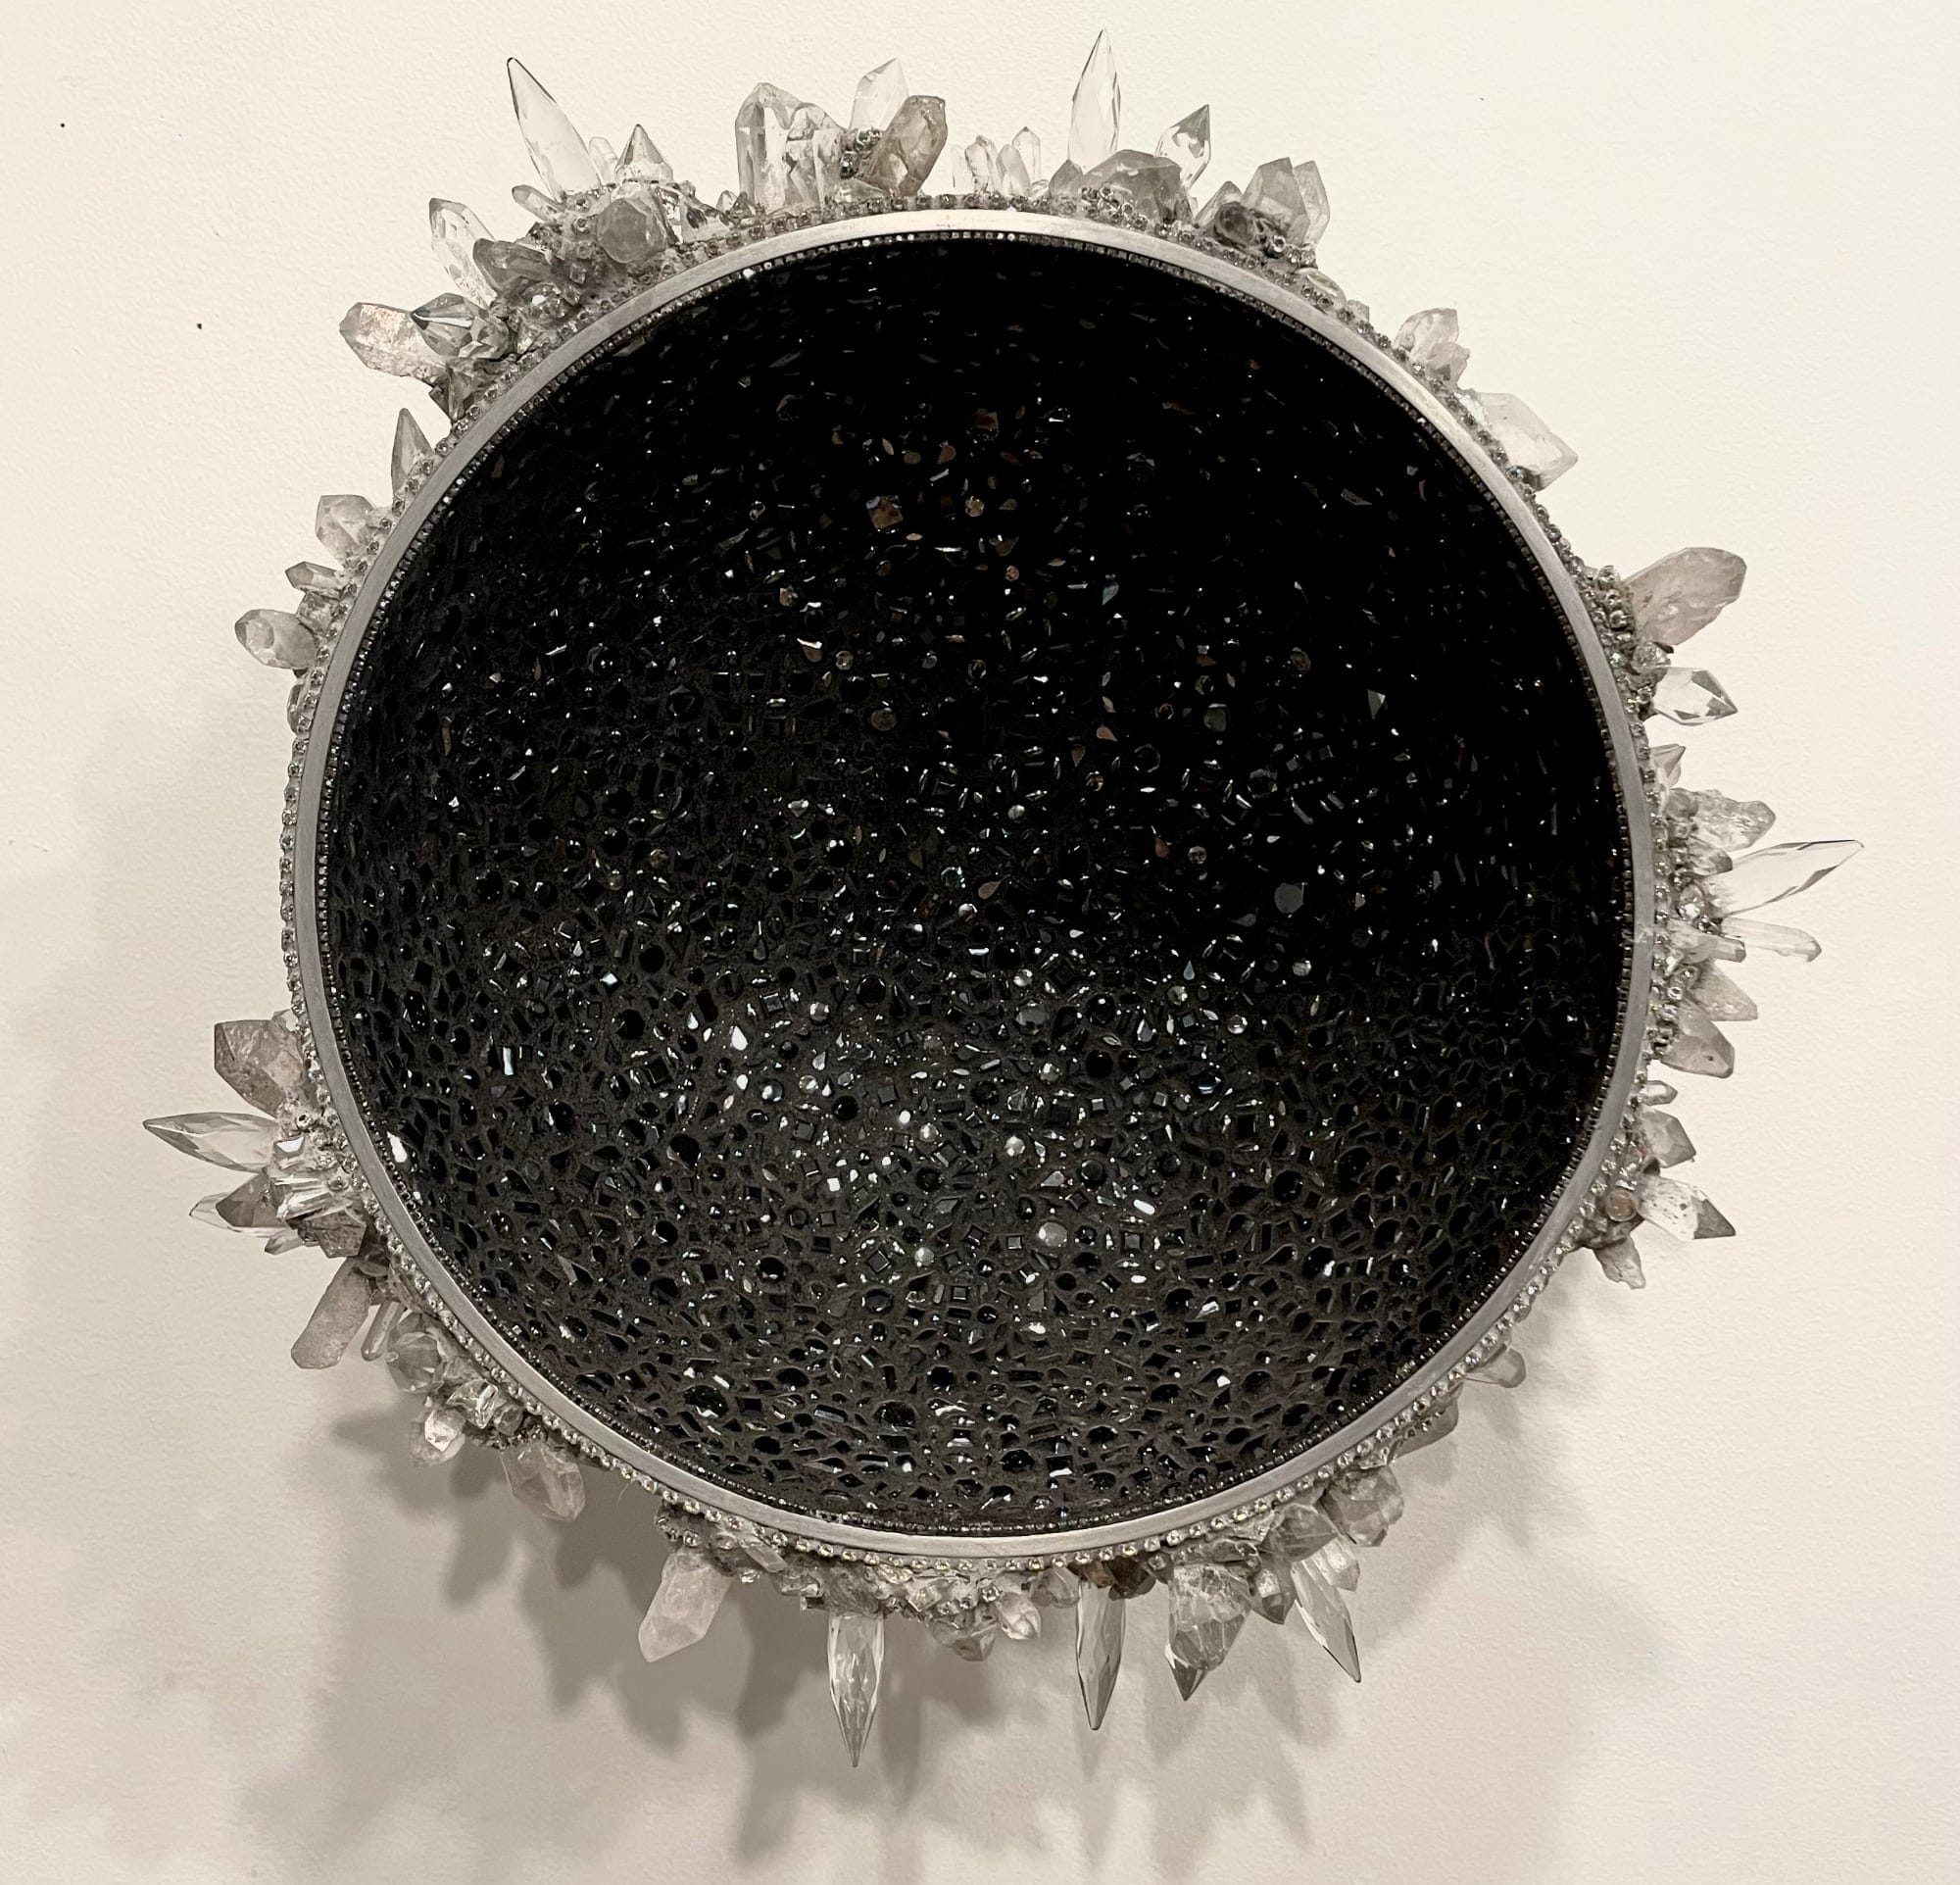 a half-orb sculpture with a glimmering black inside and sharp clear crystals around the outside